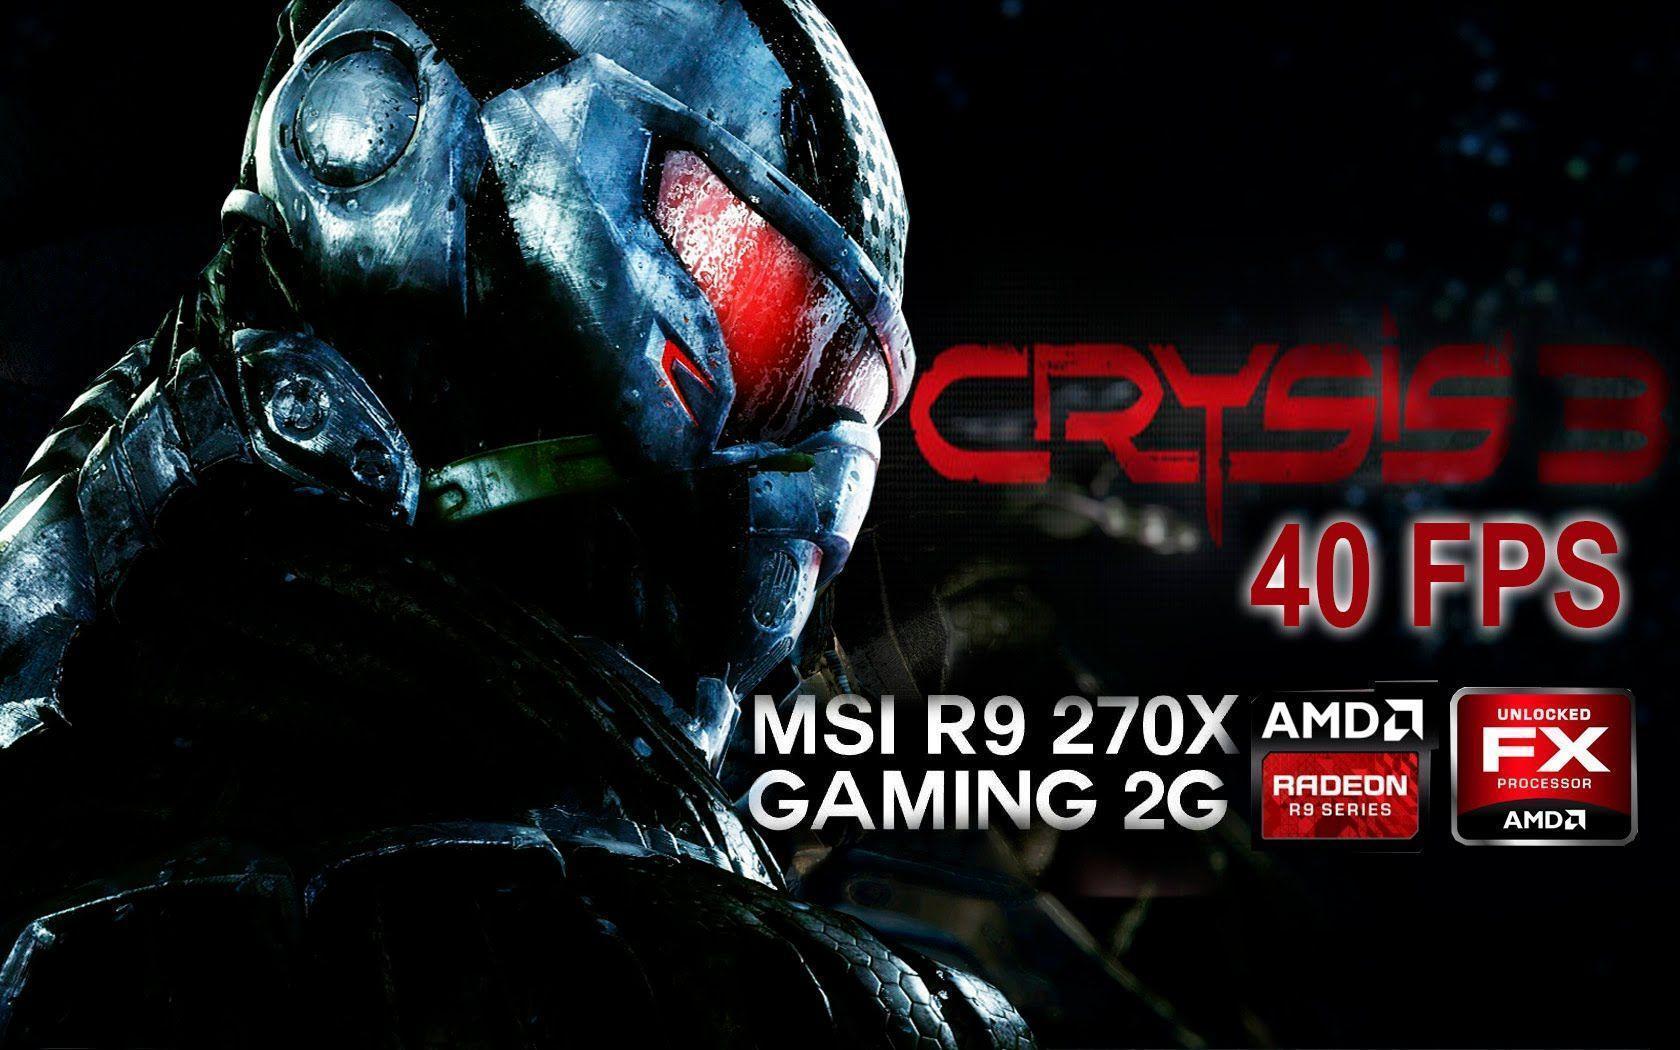 Crysis3 Gameplay Test AMD FX 6300 6 Core Black Edition /1080p /Let